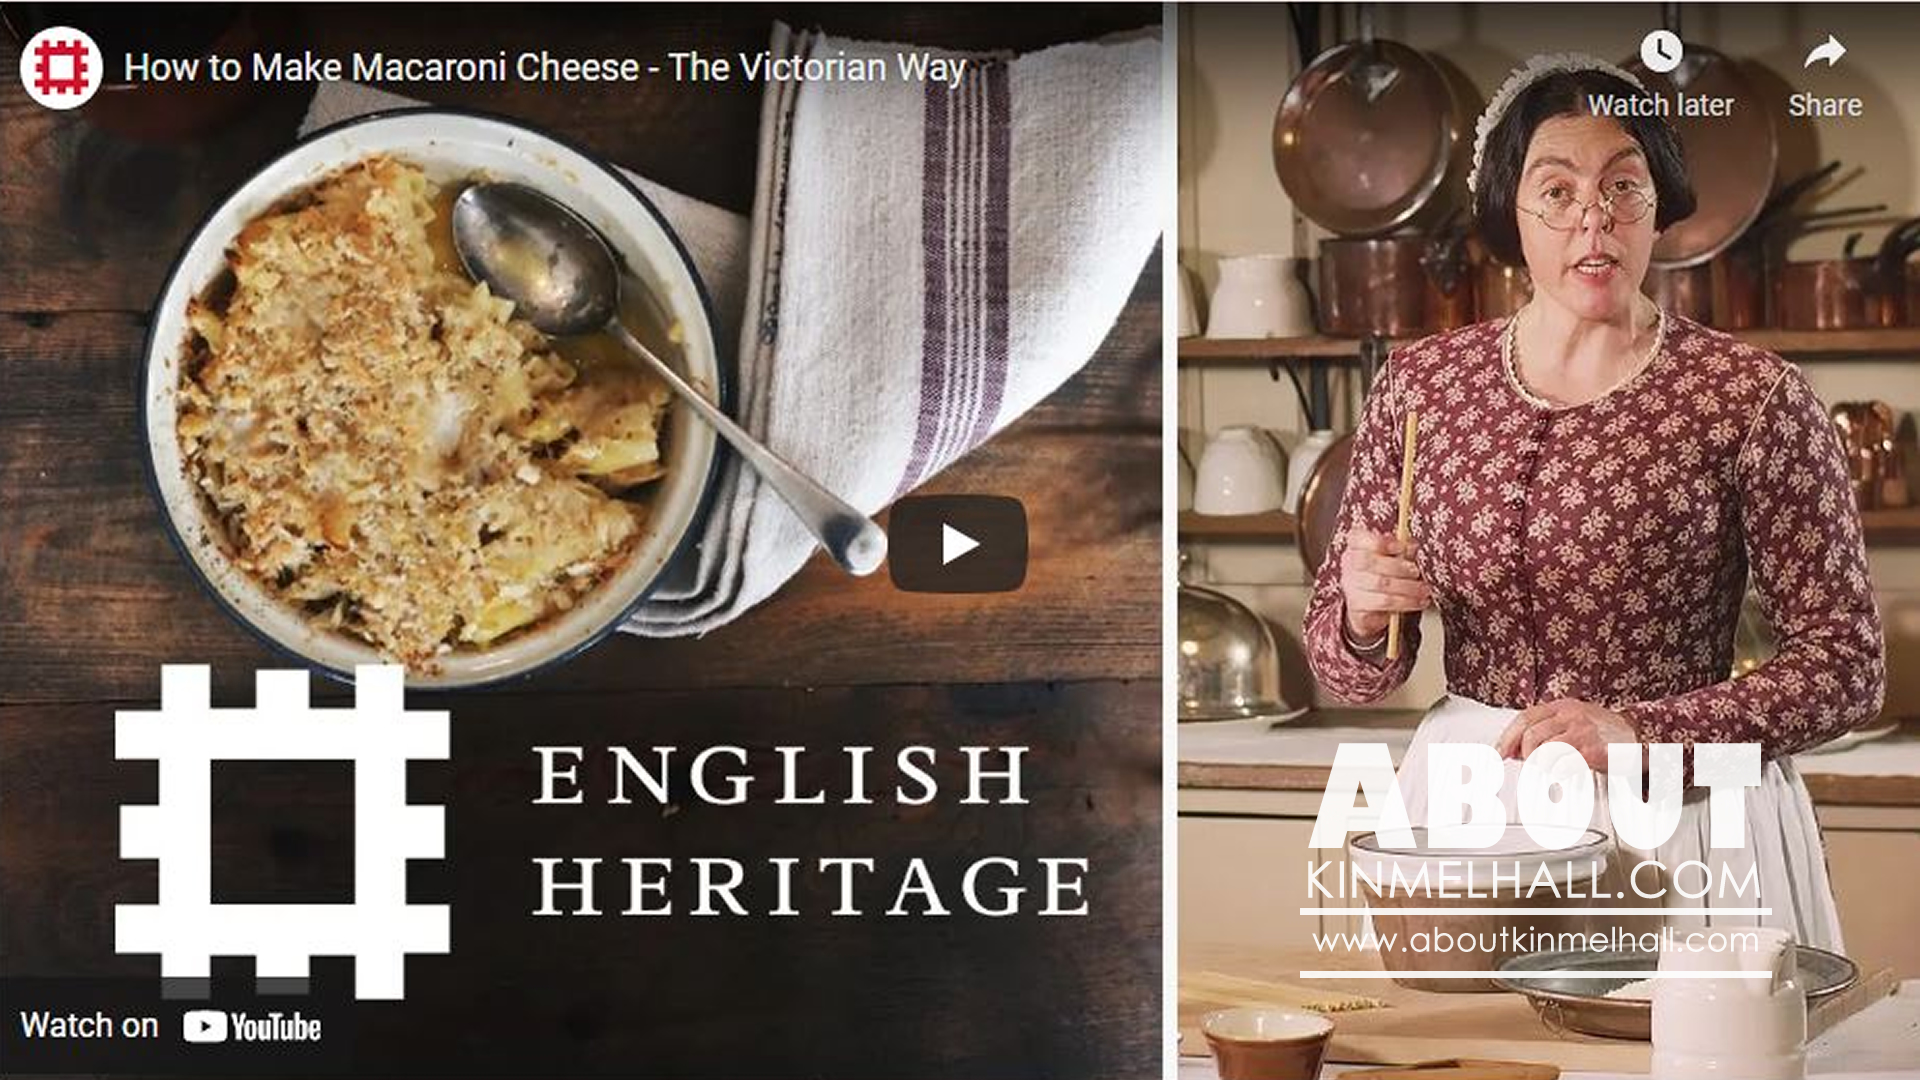 Education Resources - Victorian Cookery Session 7 by English Heritage